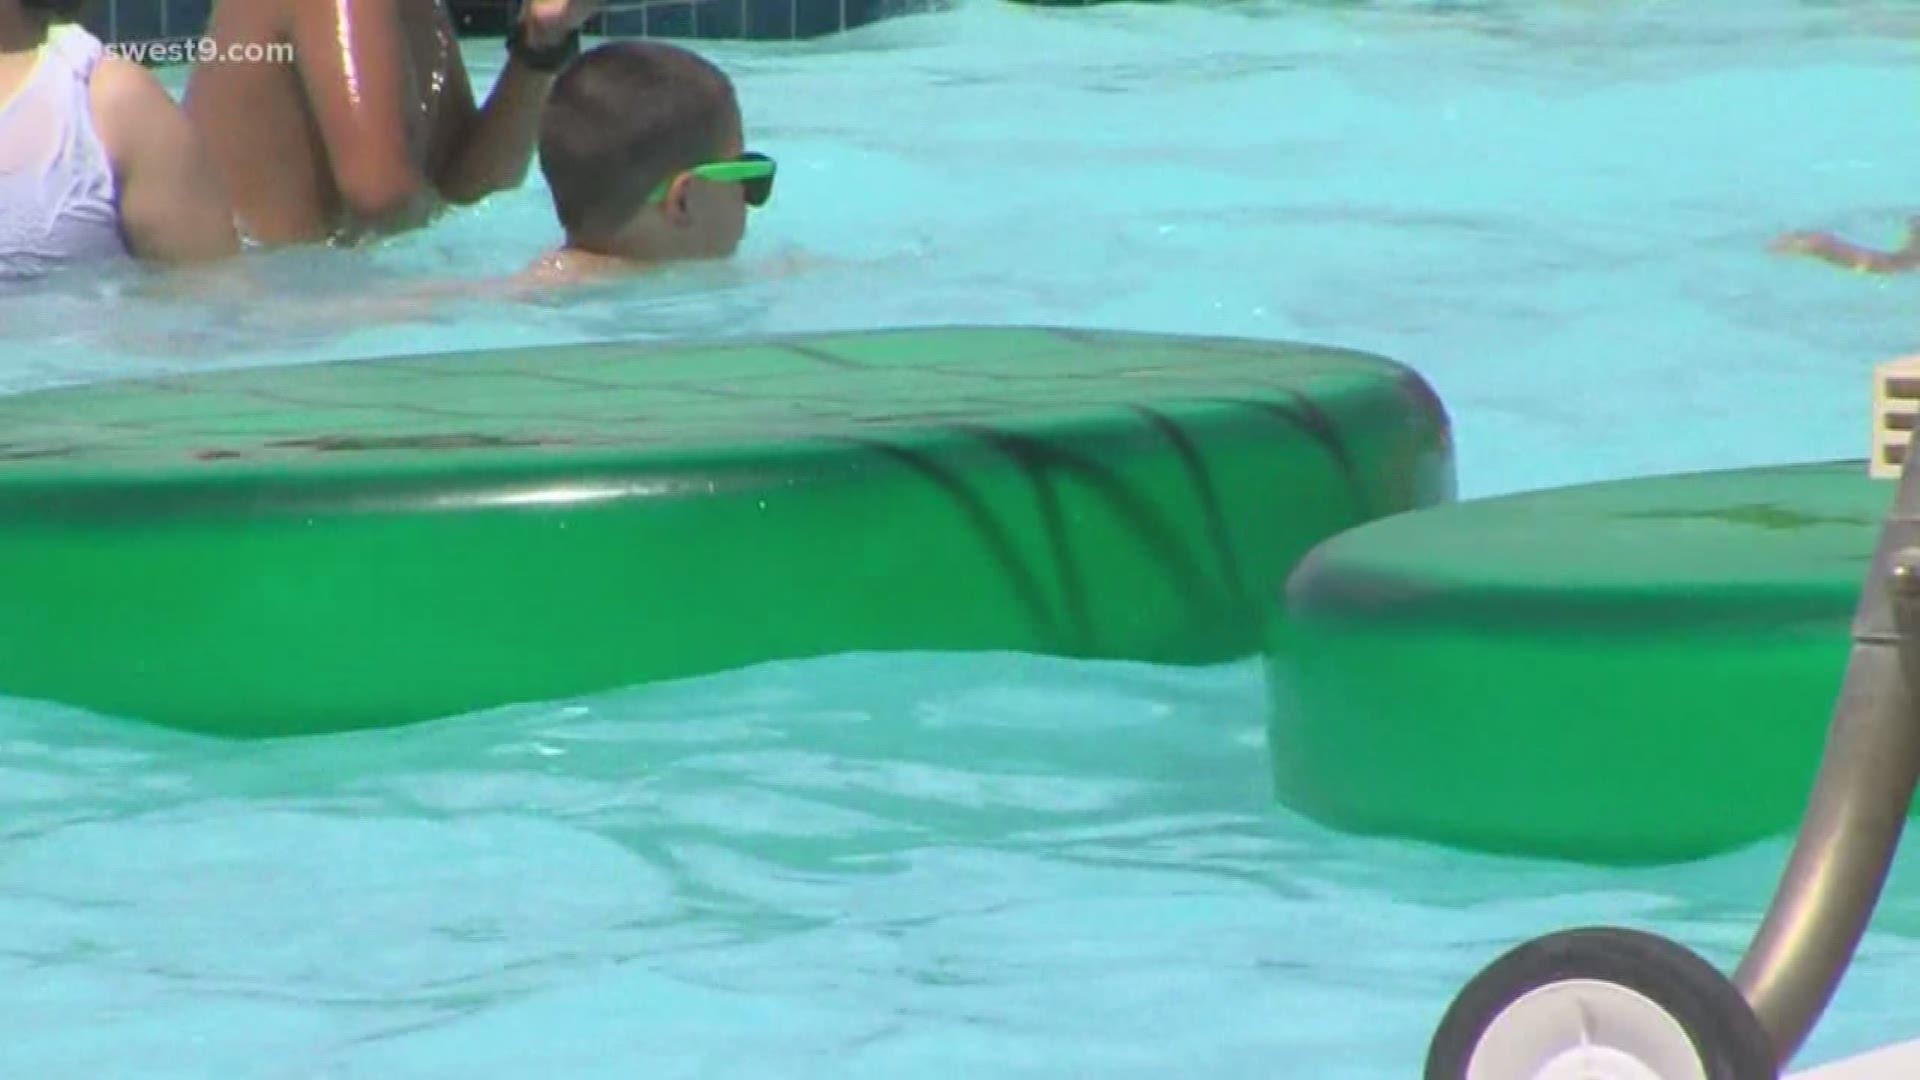 The Chief Medical Officer at Odessa Regional Medical Center says that the water itself isn't the concern when it comes to the risk of disease spread in the pool